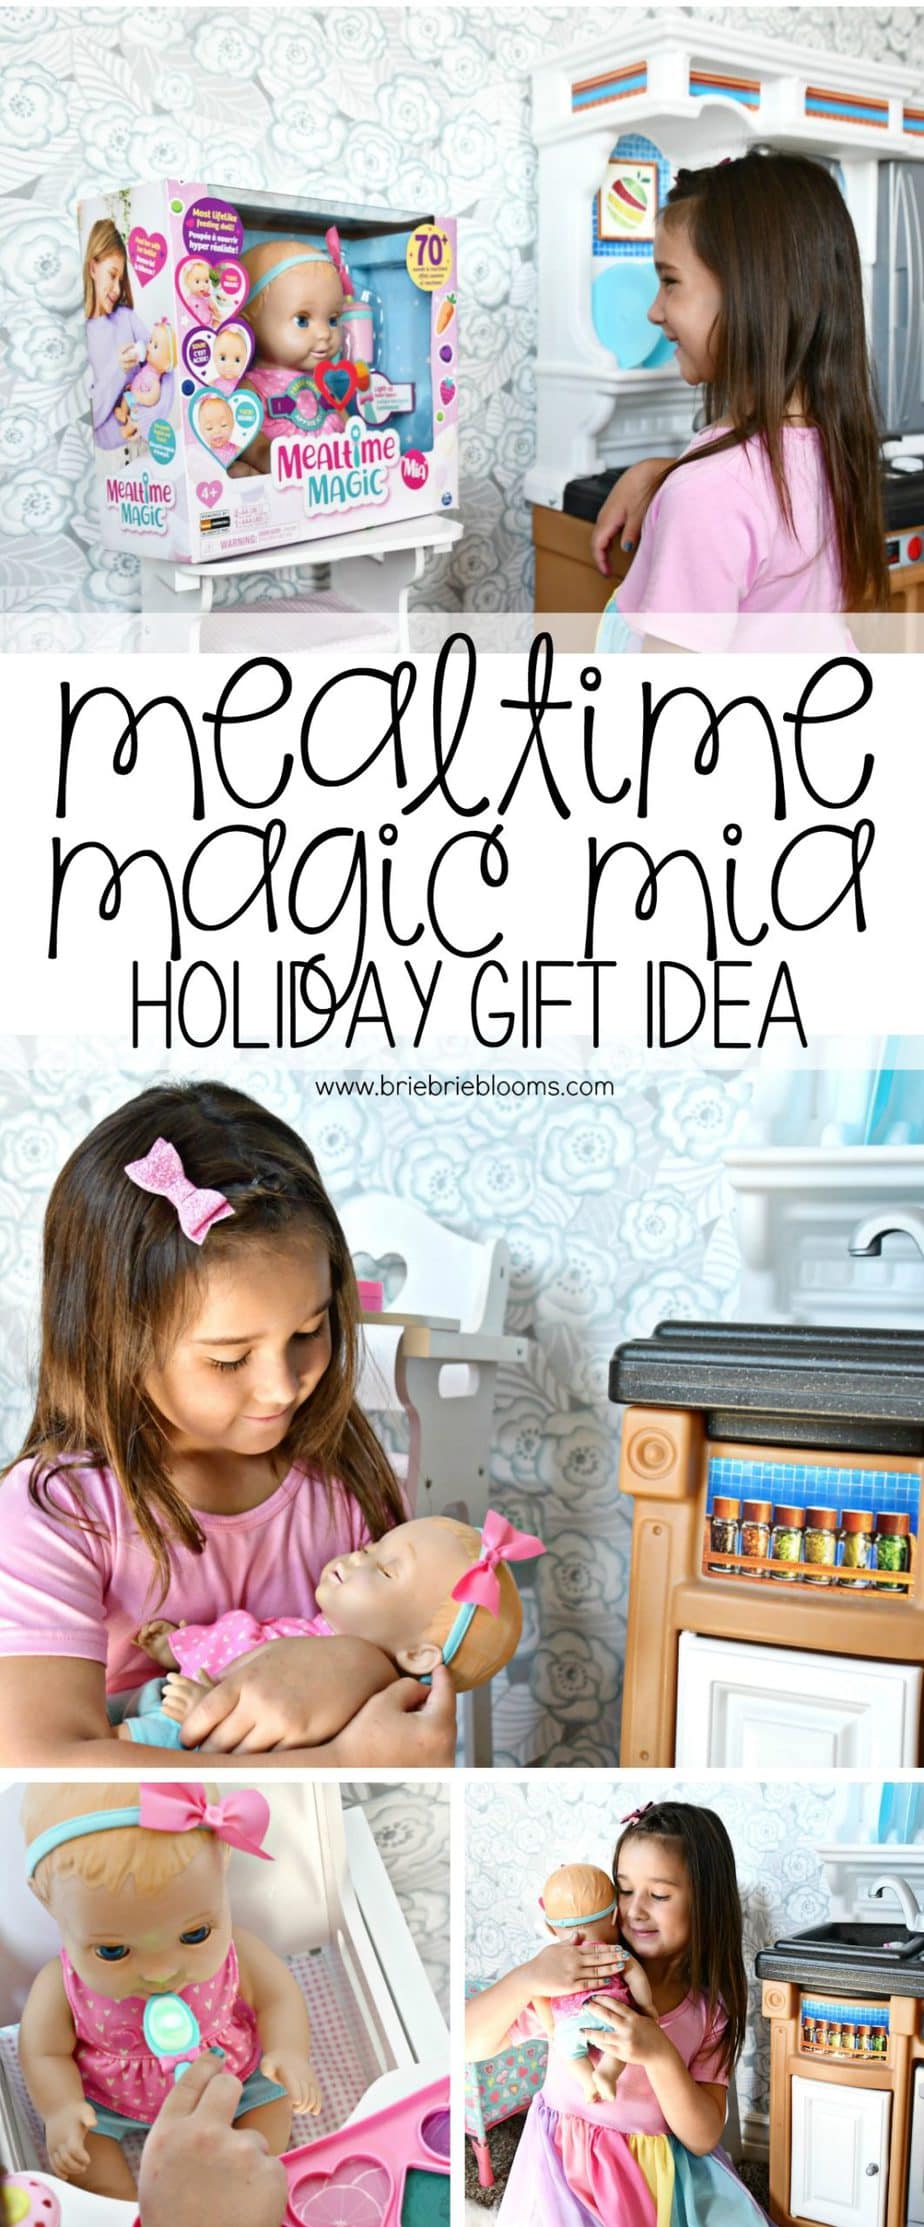 Mealtime Magic Mia is the most expressive baby doll with lifelike movements and sounds, great for pretend play! Now available at Target and Walmart for the perfect holiday gift.